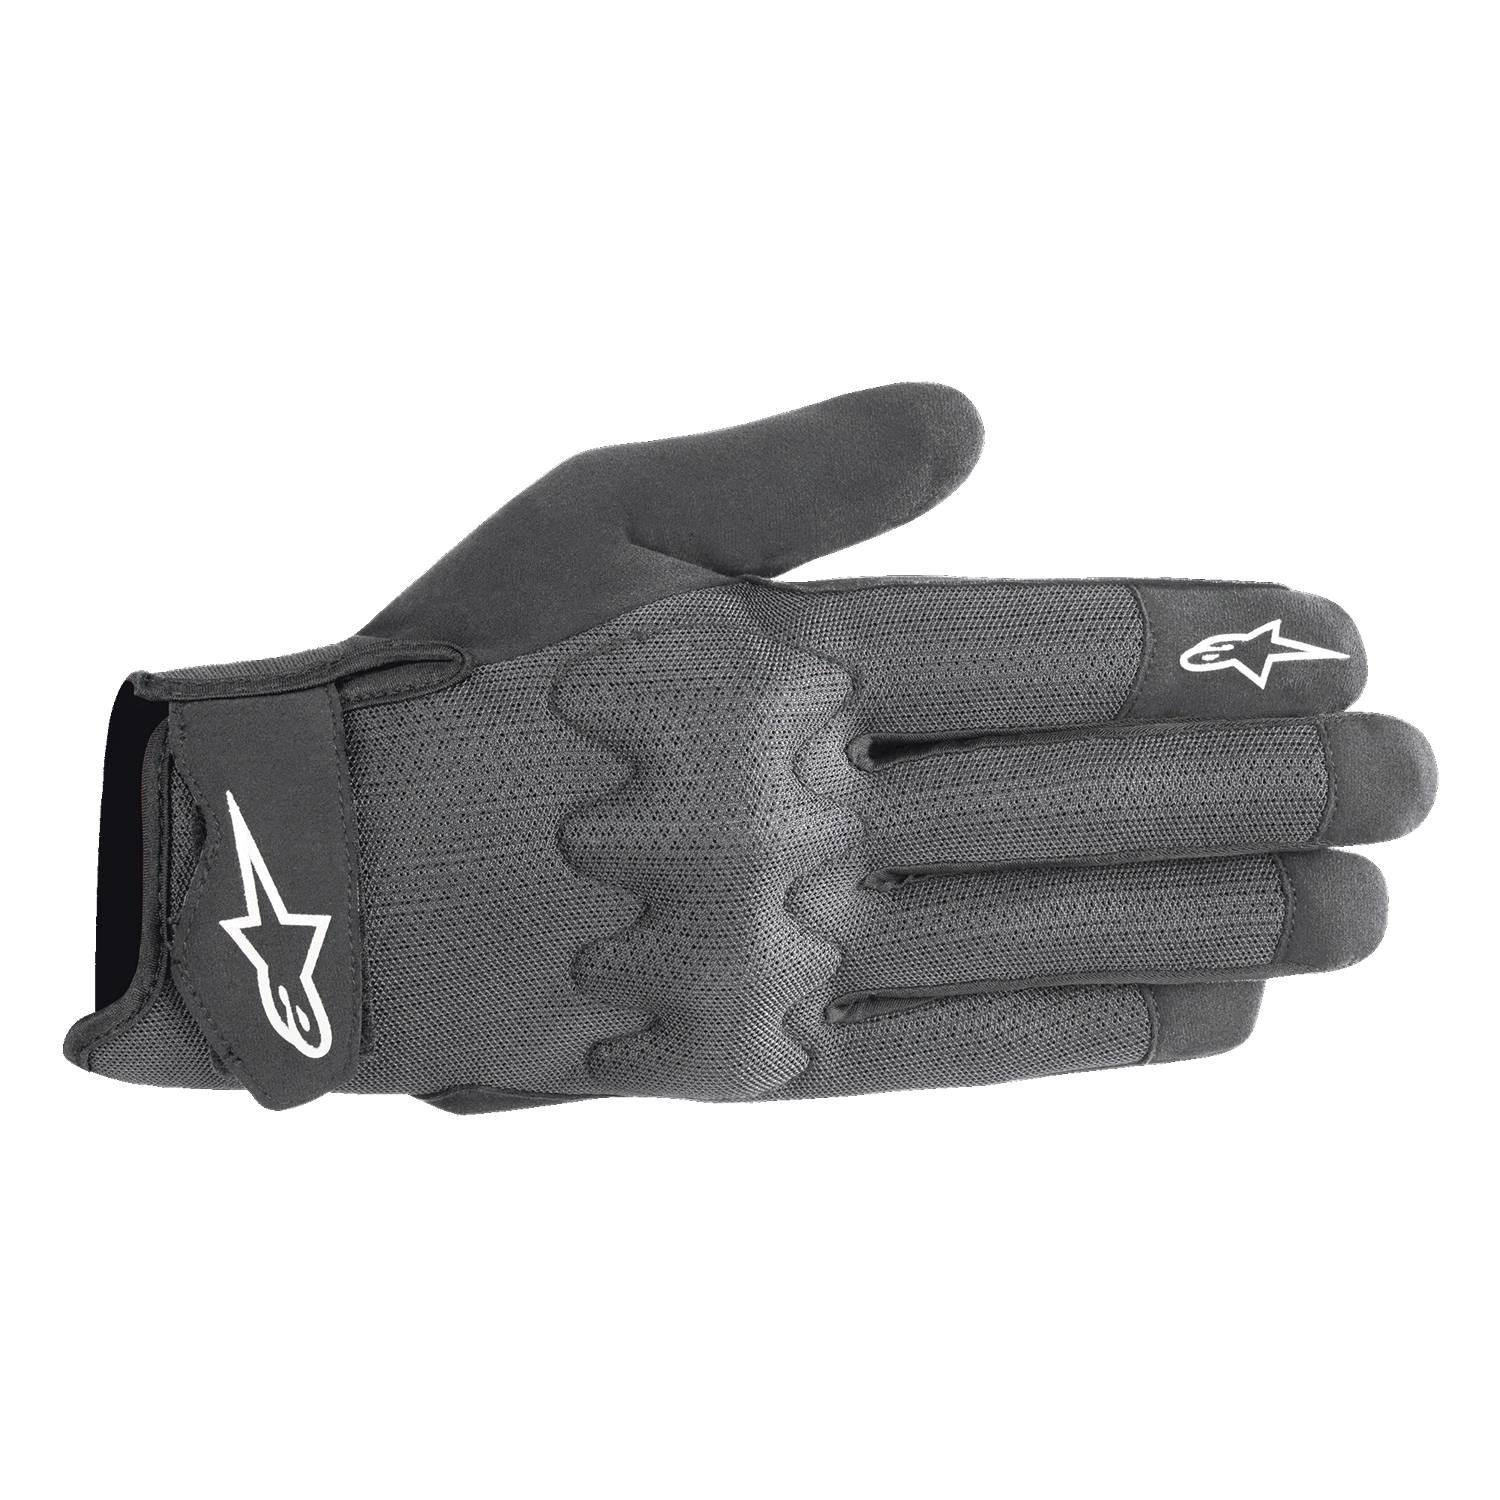 Image of Alpinestars Stated Air Gloves Black Silver Size XL ID 8059347168661